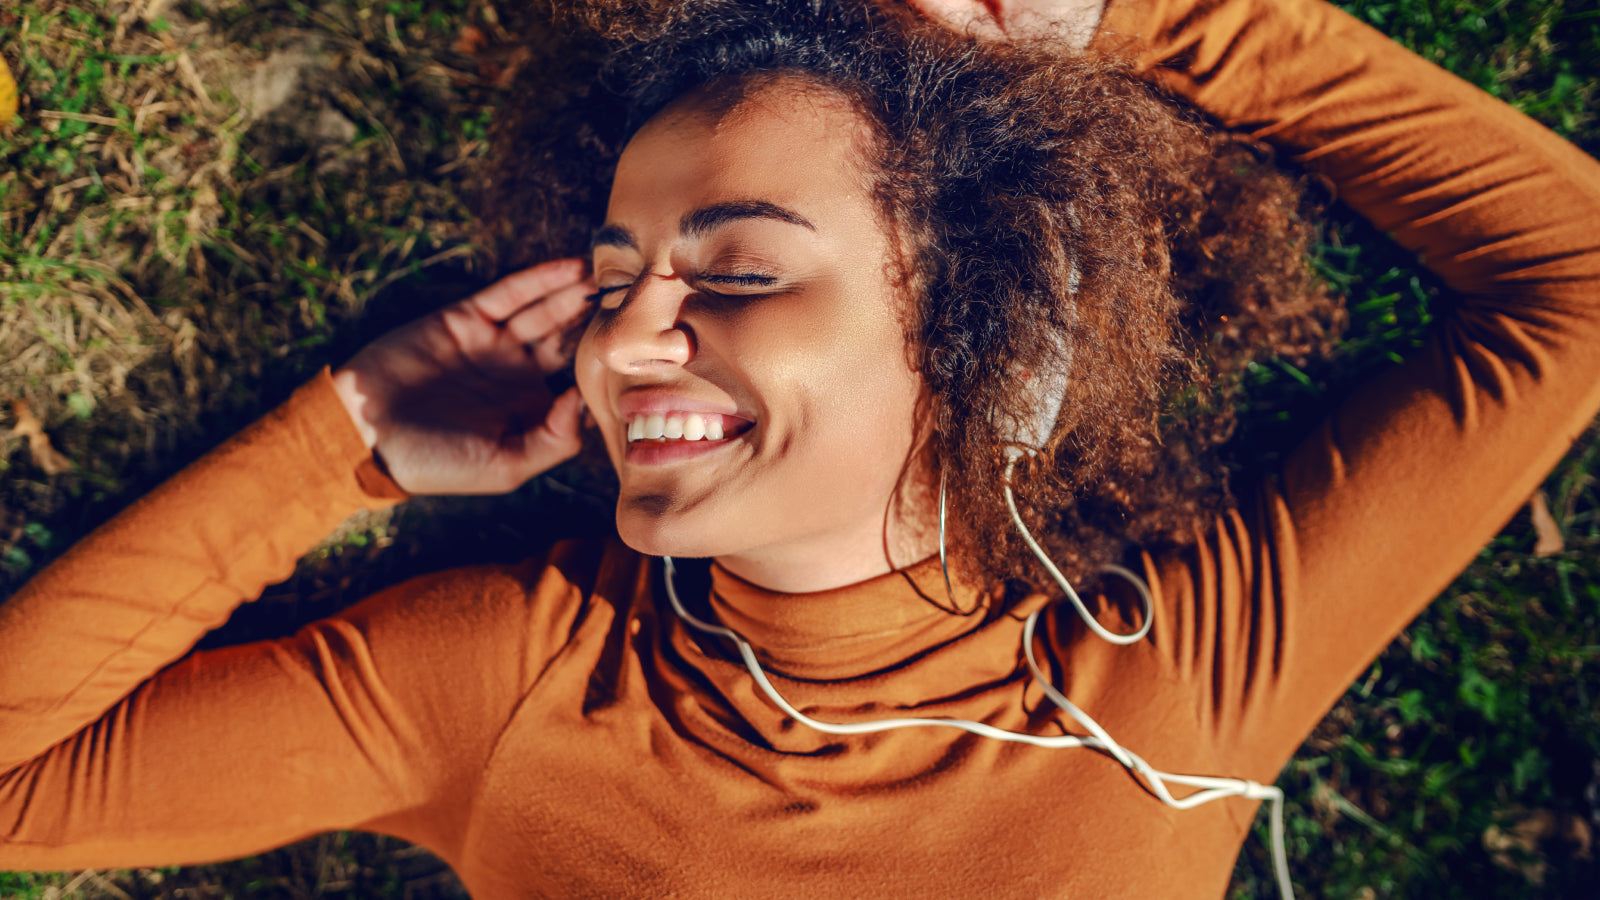 A woman with brown curly hair wearing a burnt orange long sleeve shirt listens to headphones while laying on the grass